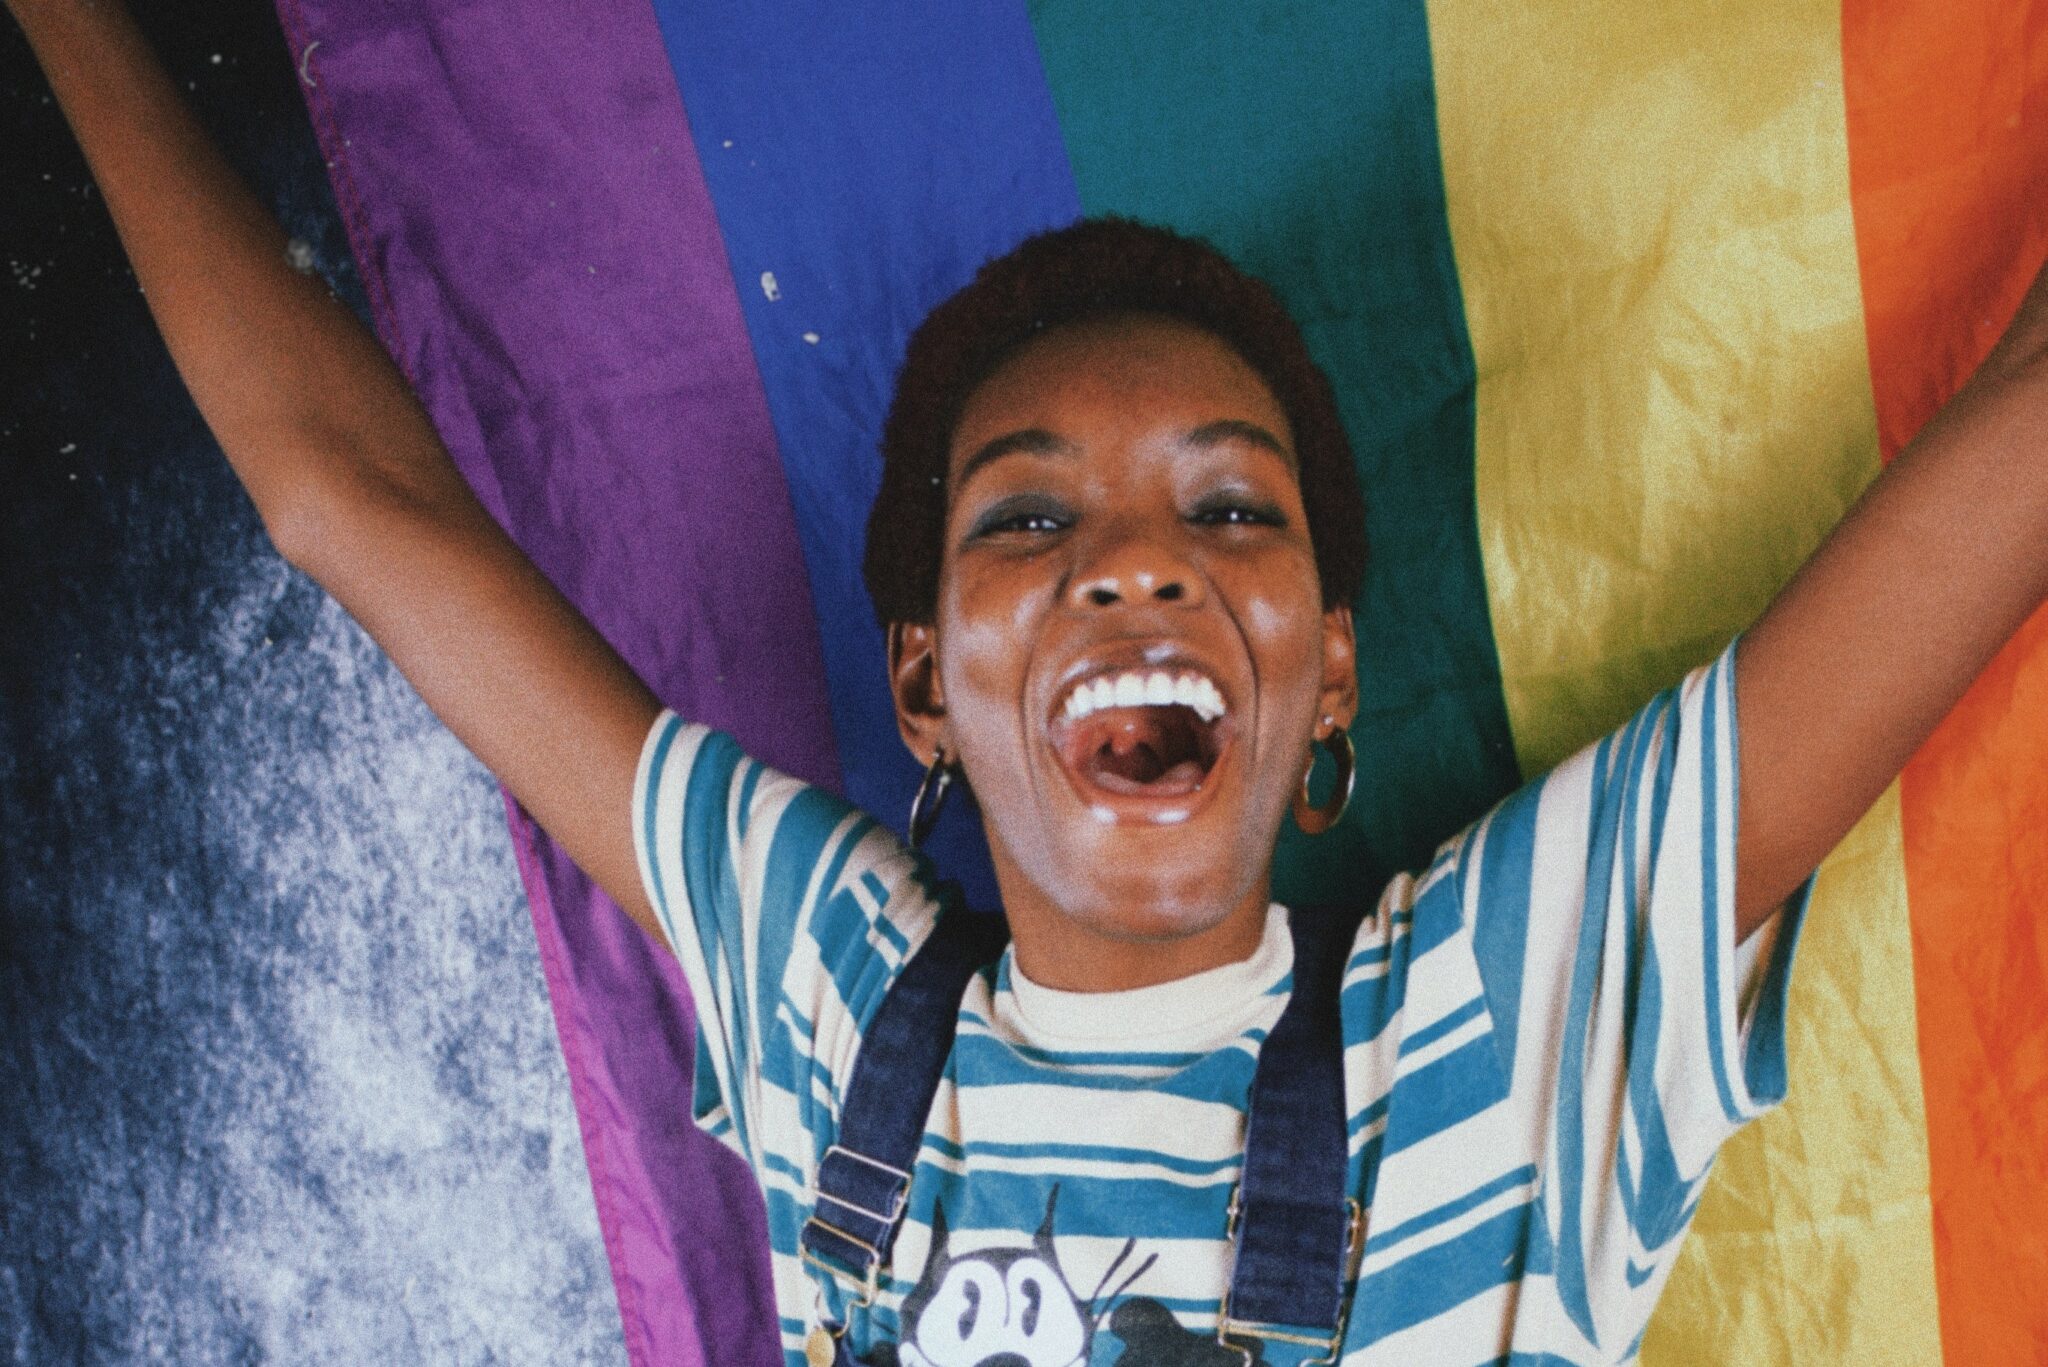 A Black woman holding a rainbow flagging and smiling widely.